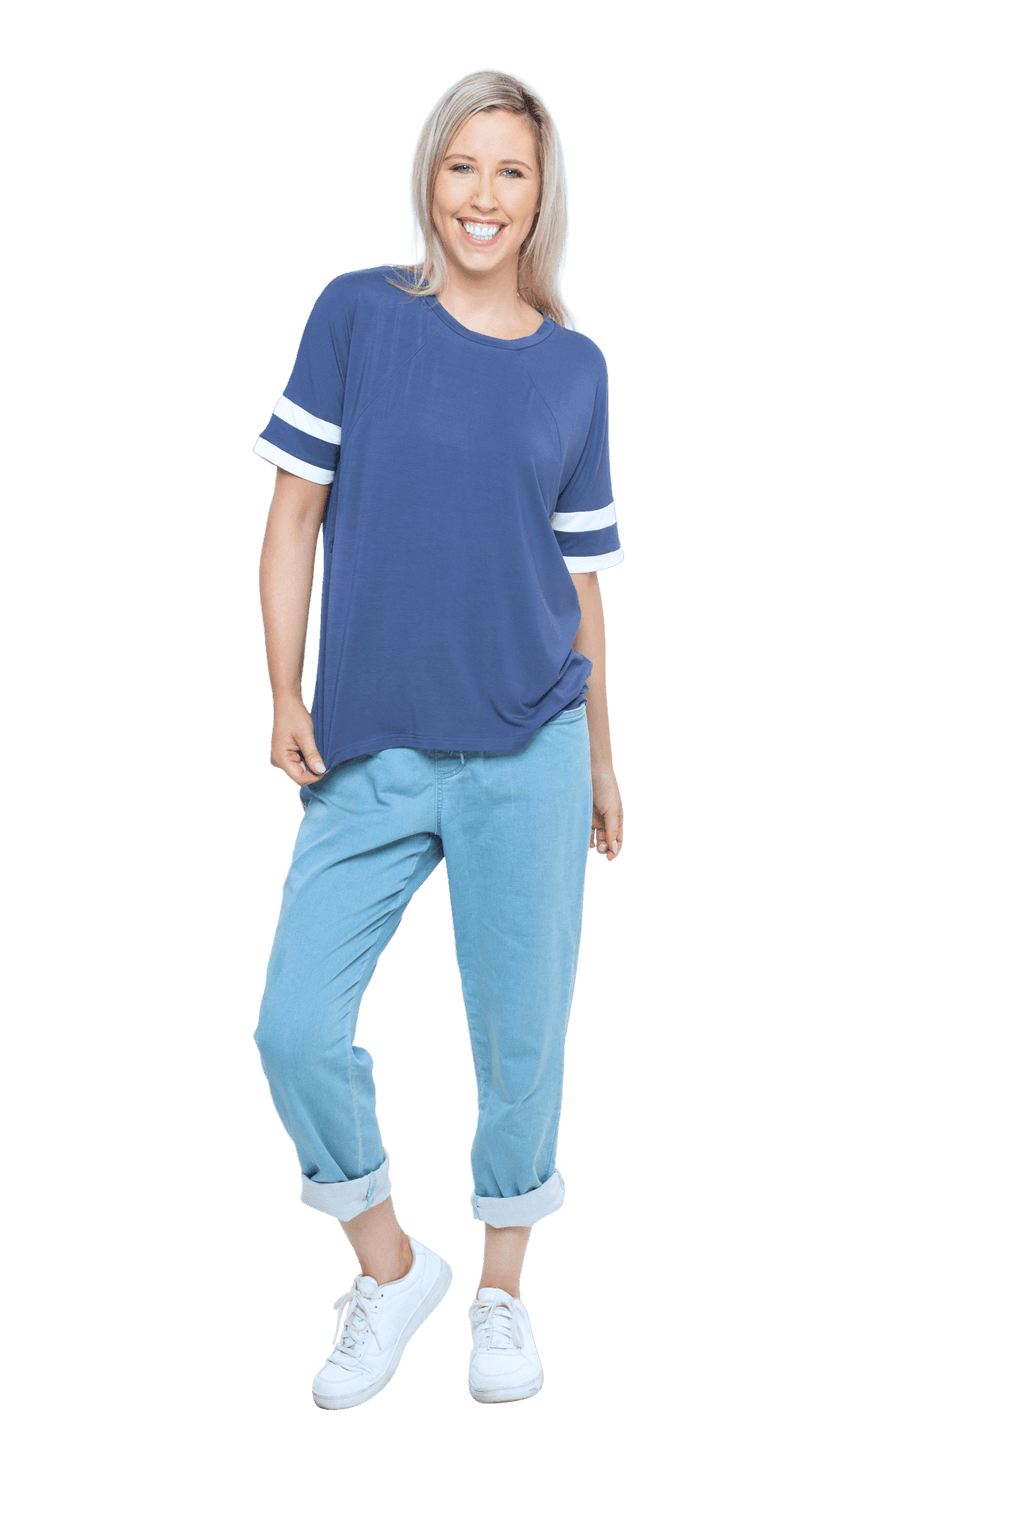 Petite model facing camera wearing navy blue, short sleeved, relaxed fit top, features rounded neckline and two white varsity stripes on the sleeve. Cameron available in sizes 6-26